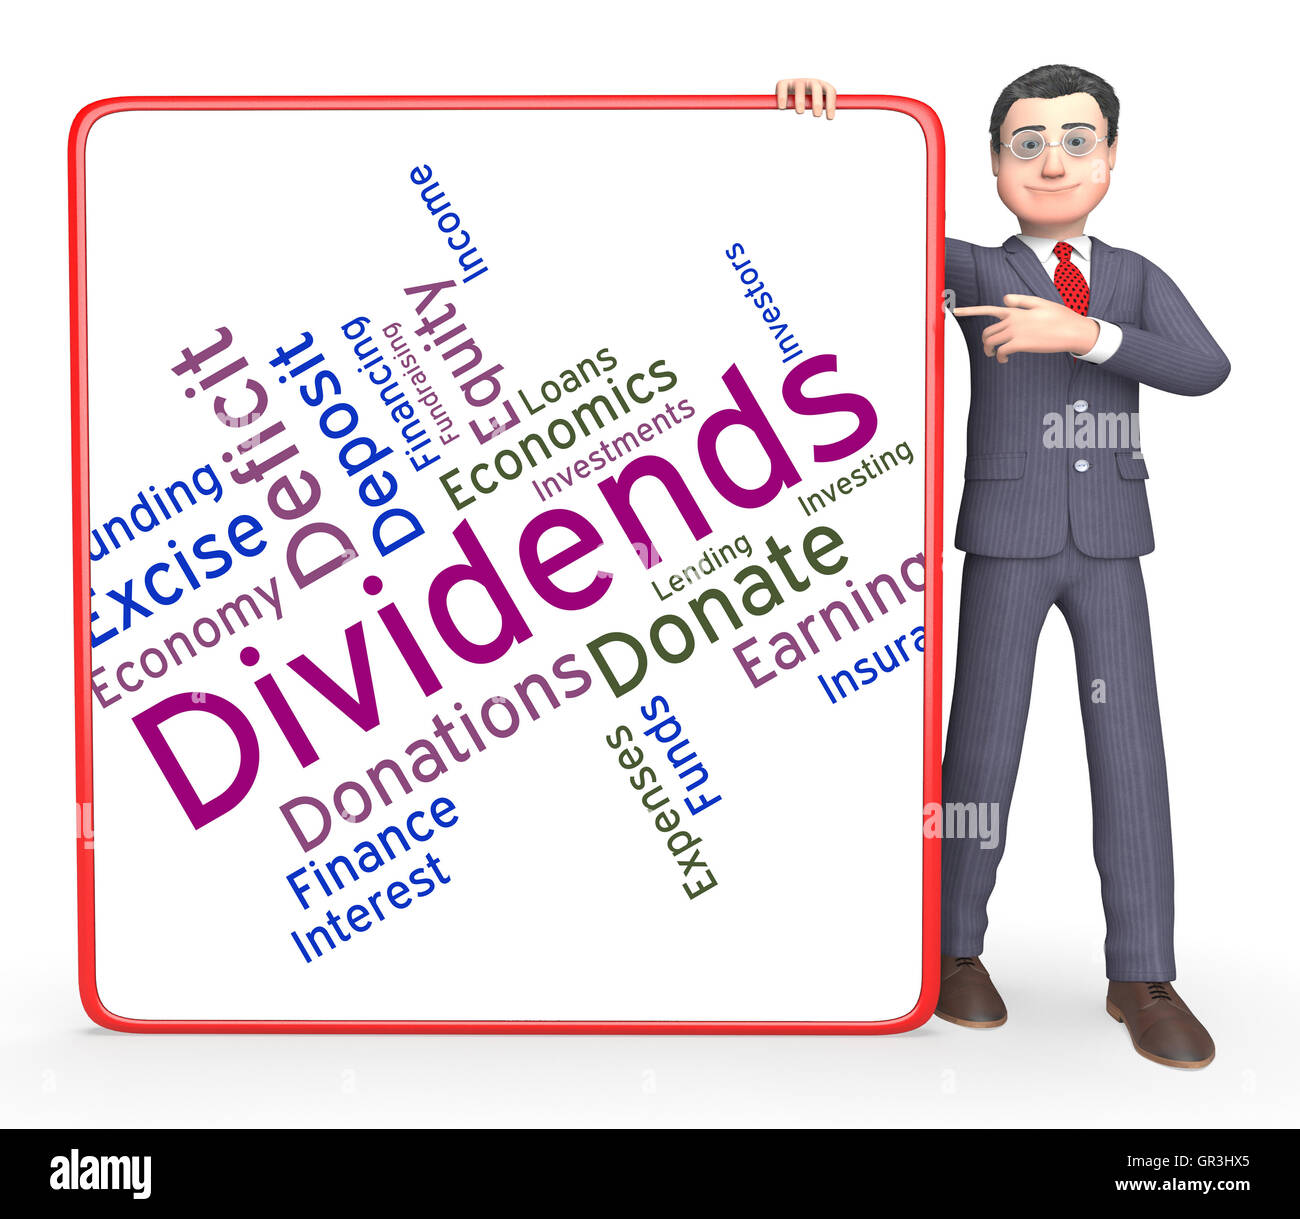 Dividends Word Showing Stock Market And Words Stock Photo